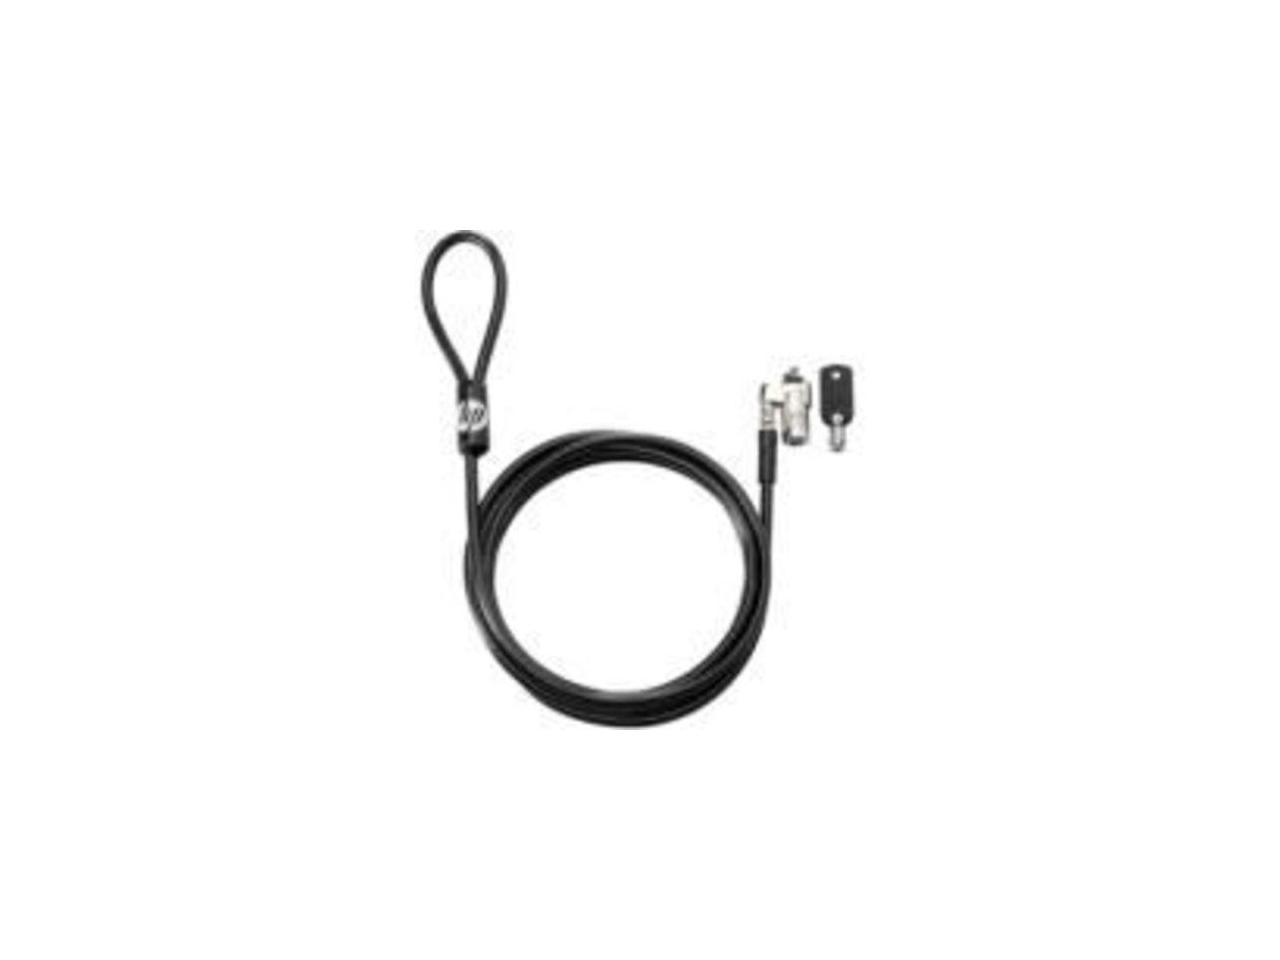 Hp Keyed Cable Lock 10 Mm